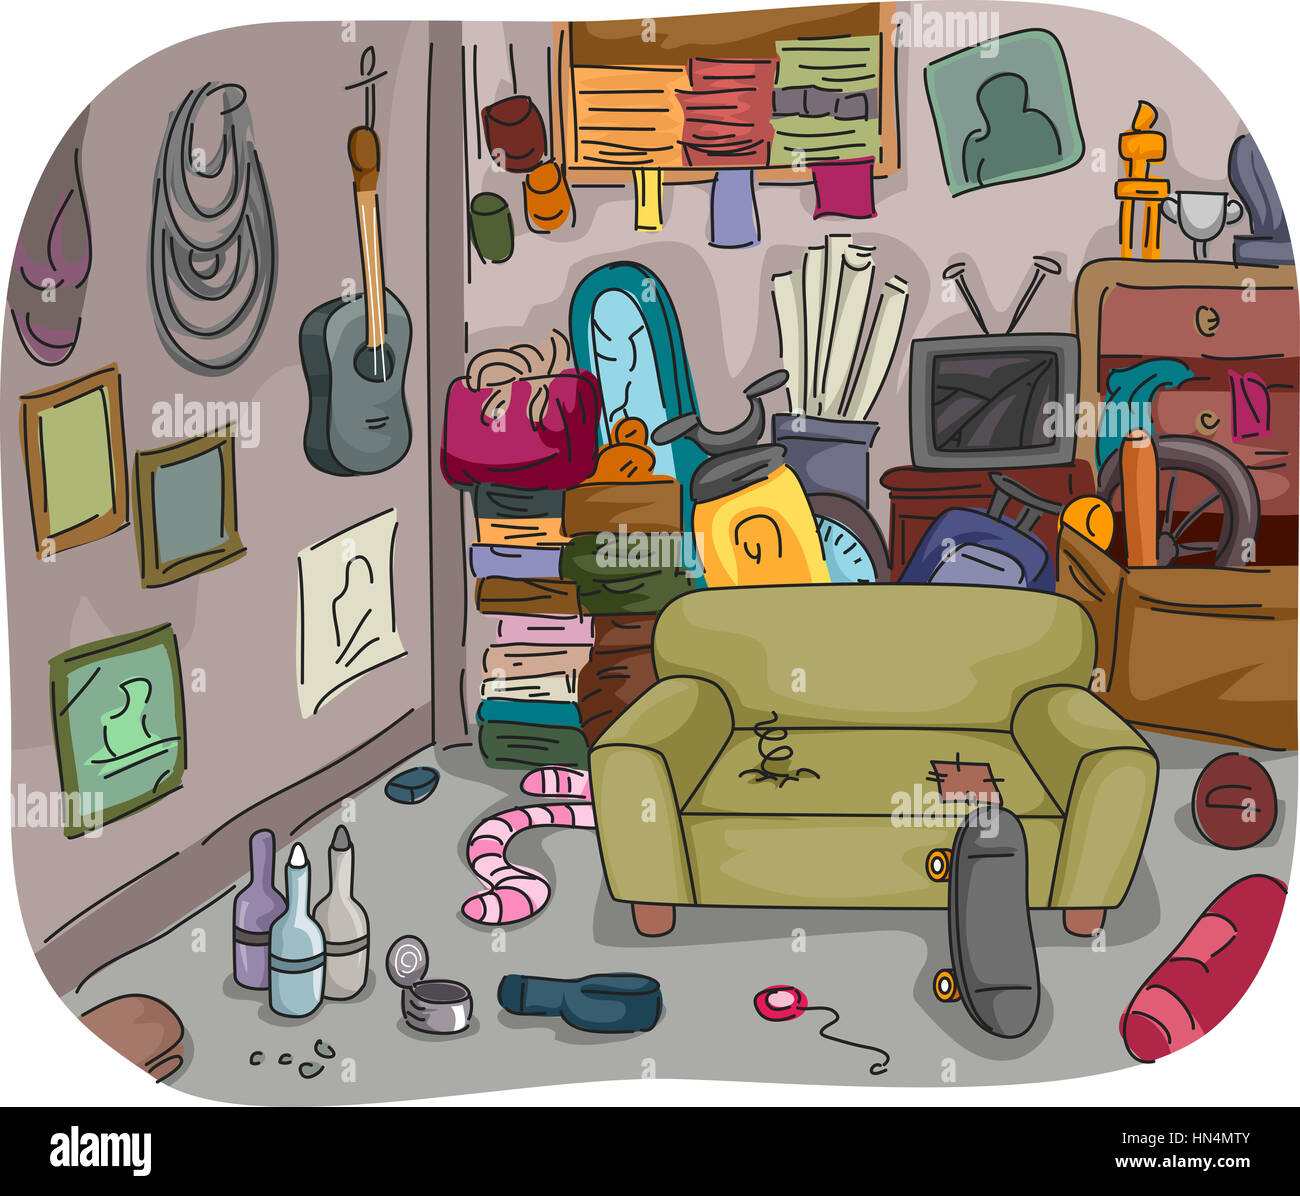 Illustration of a Room Full of Clutter Stock Photo